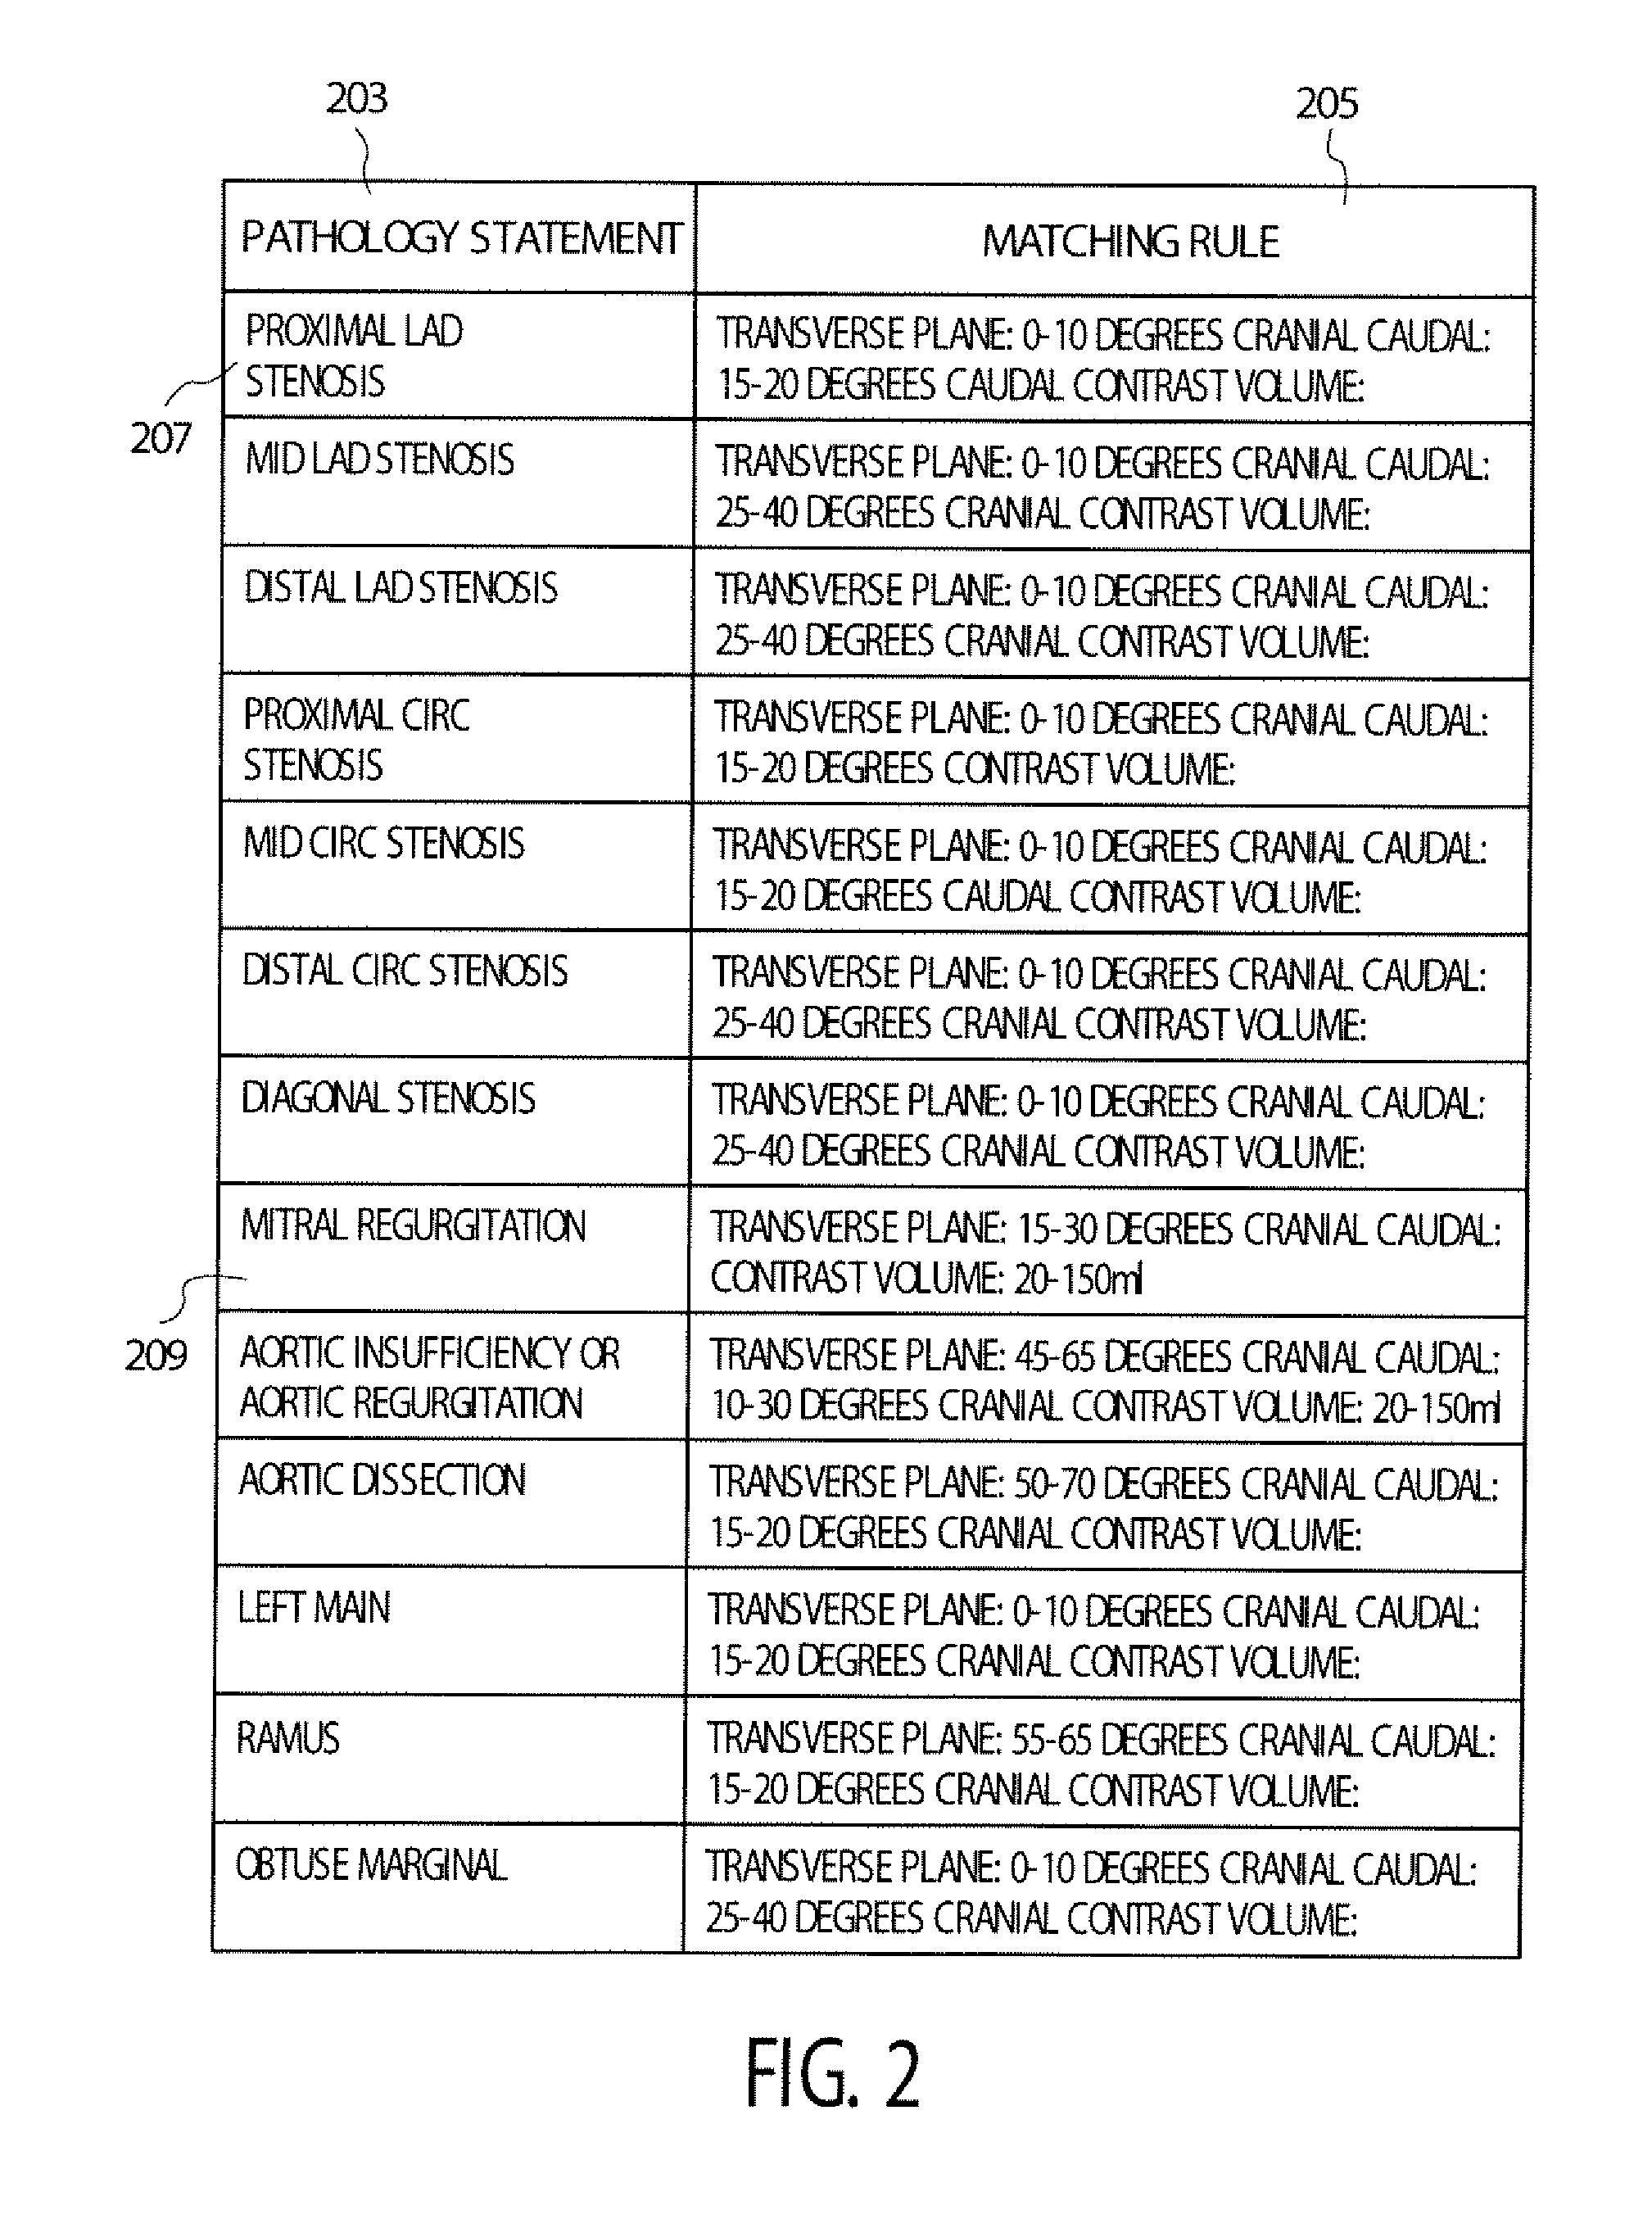 System for processing imaging device data and associated imaging report information